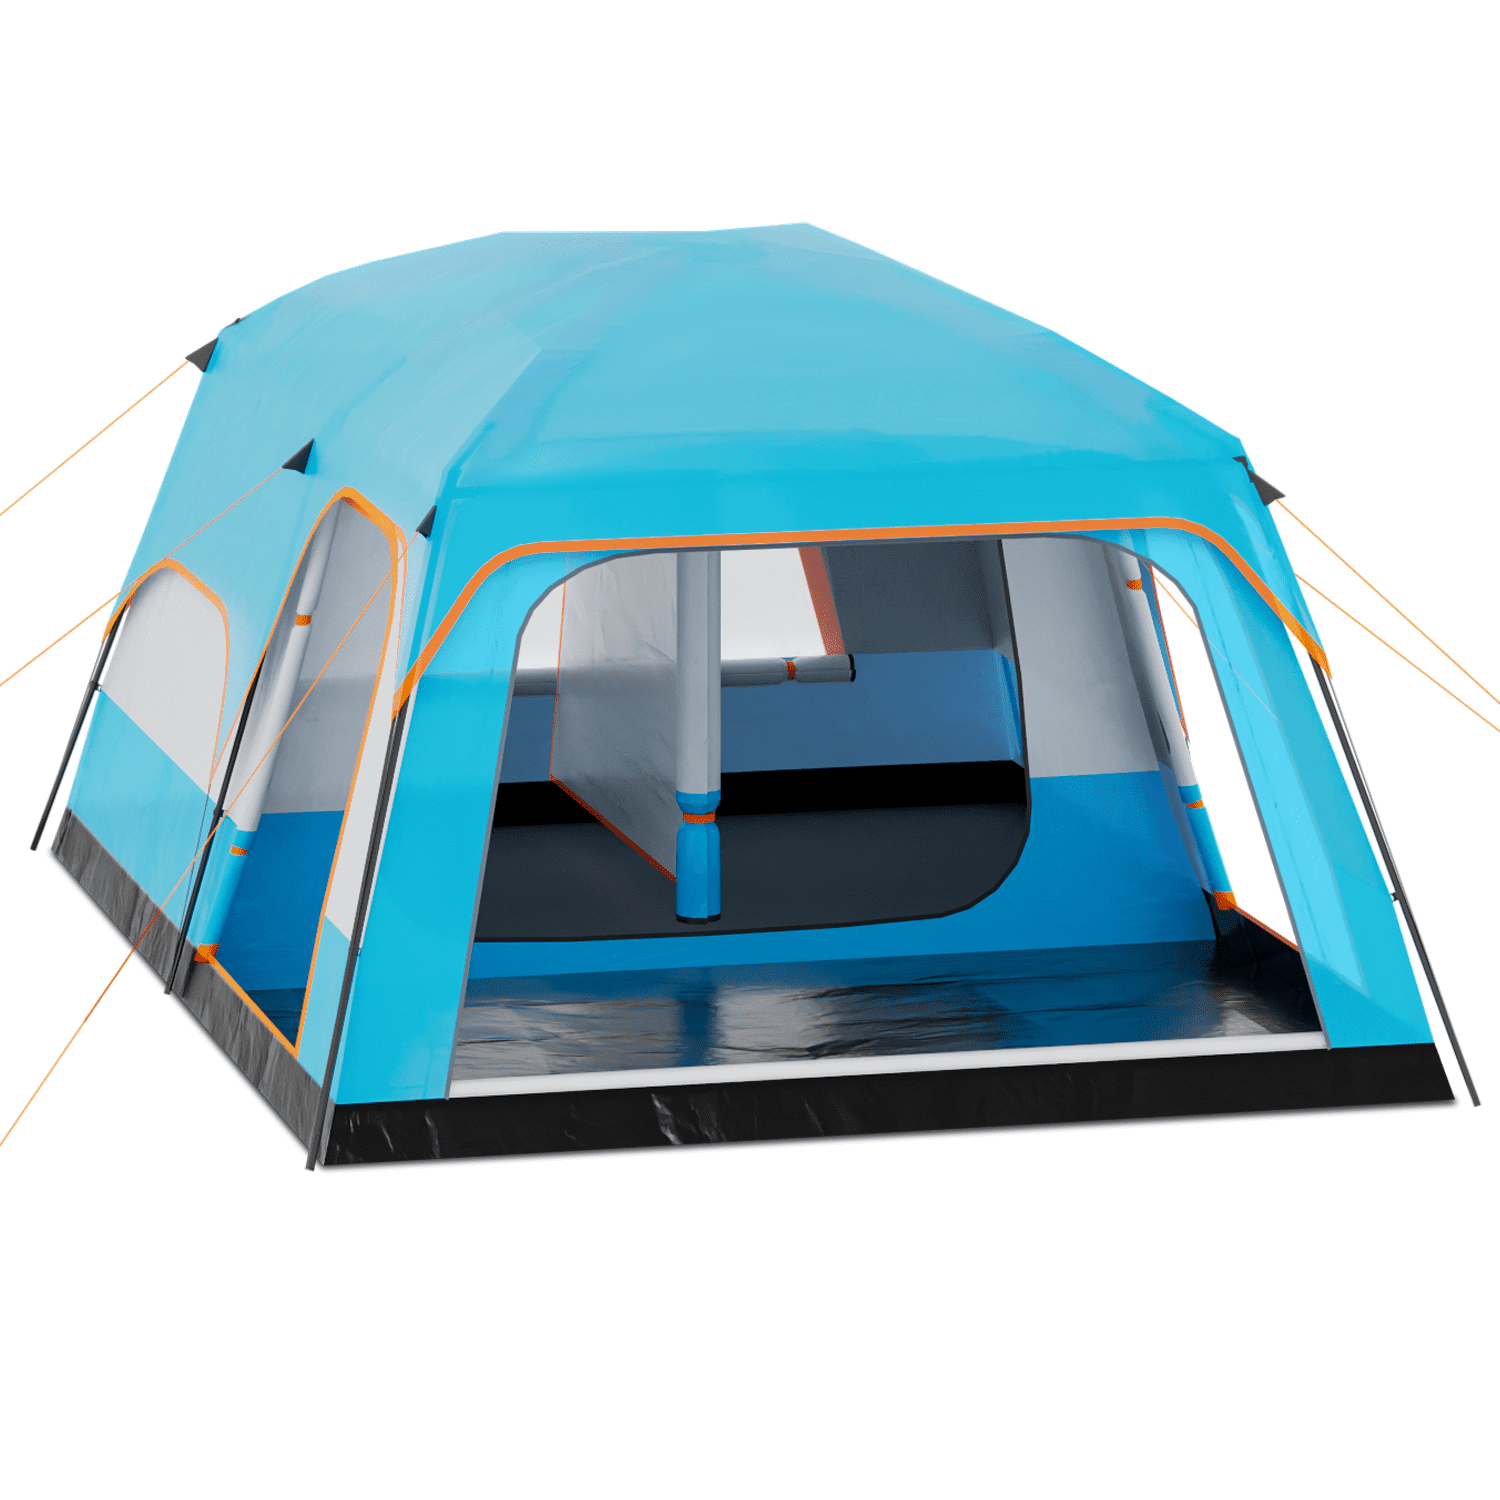 MoNiBloom Extra Large Tent 5-8 Person, Family Cabin Tents with 2